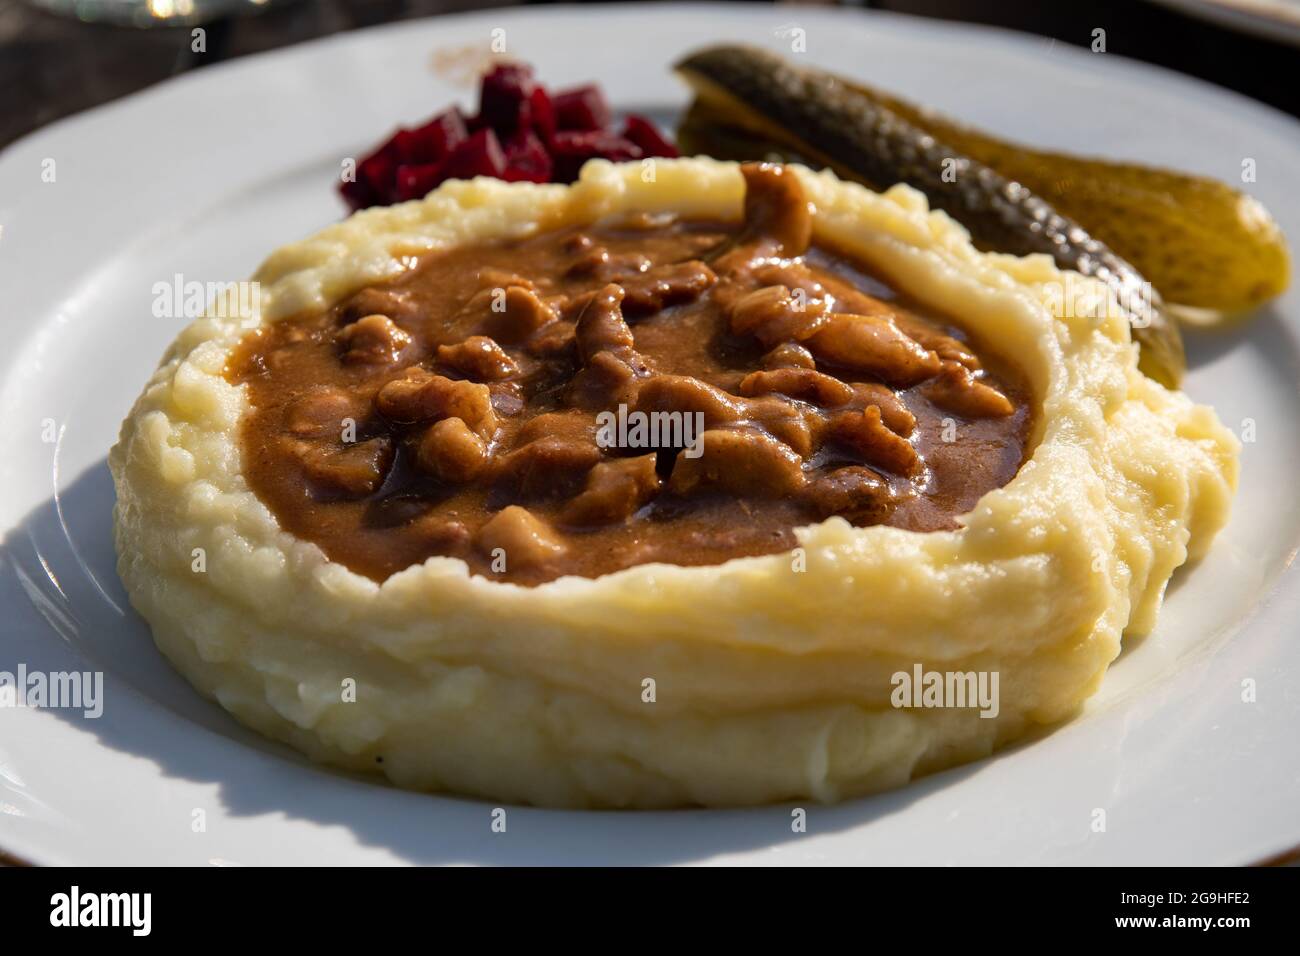 Läskisoosi, traditional Finnish pork gravy dish with mashed potatoes, pickled beatroot and pickles on a white plate Stock Photo